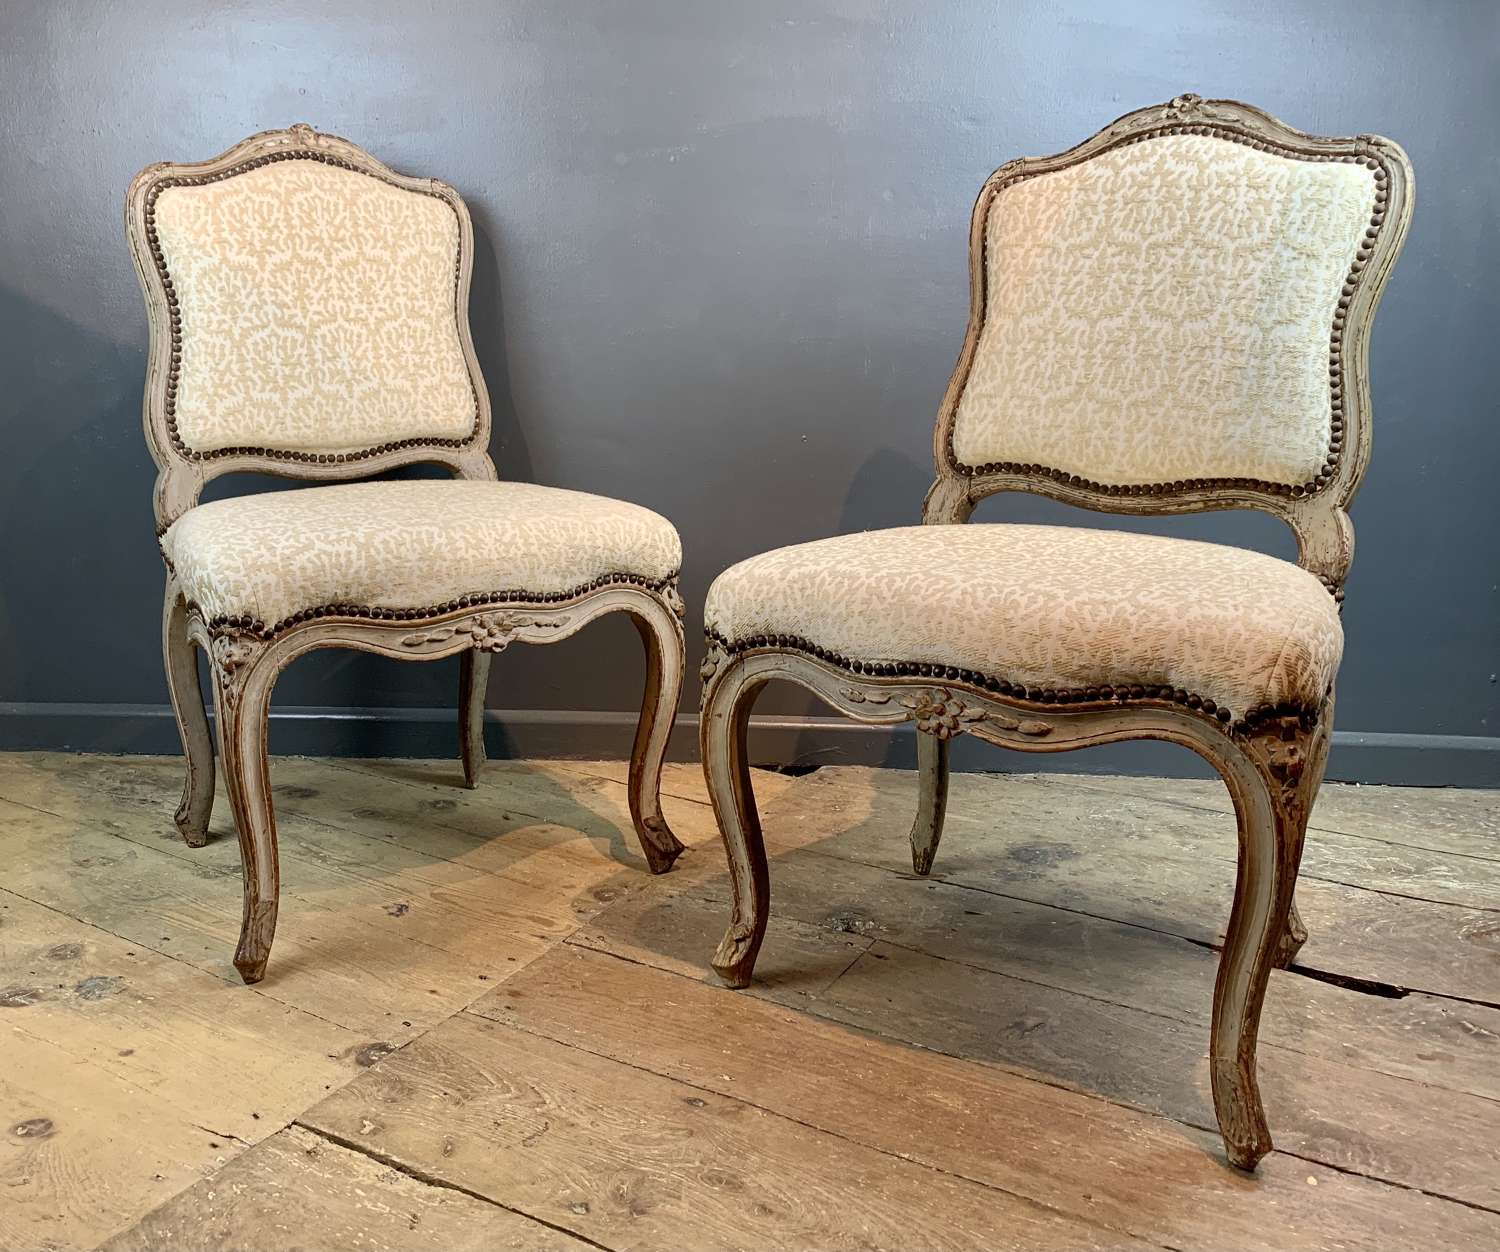 Pair of French 18th Century Louis XV Style Chairs in Original Paint